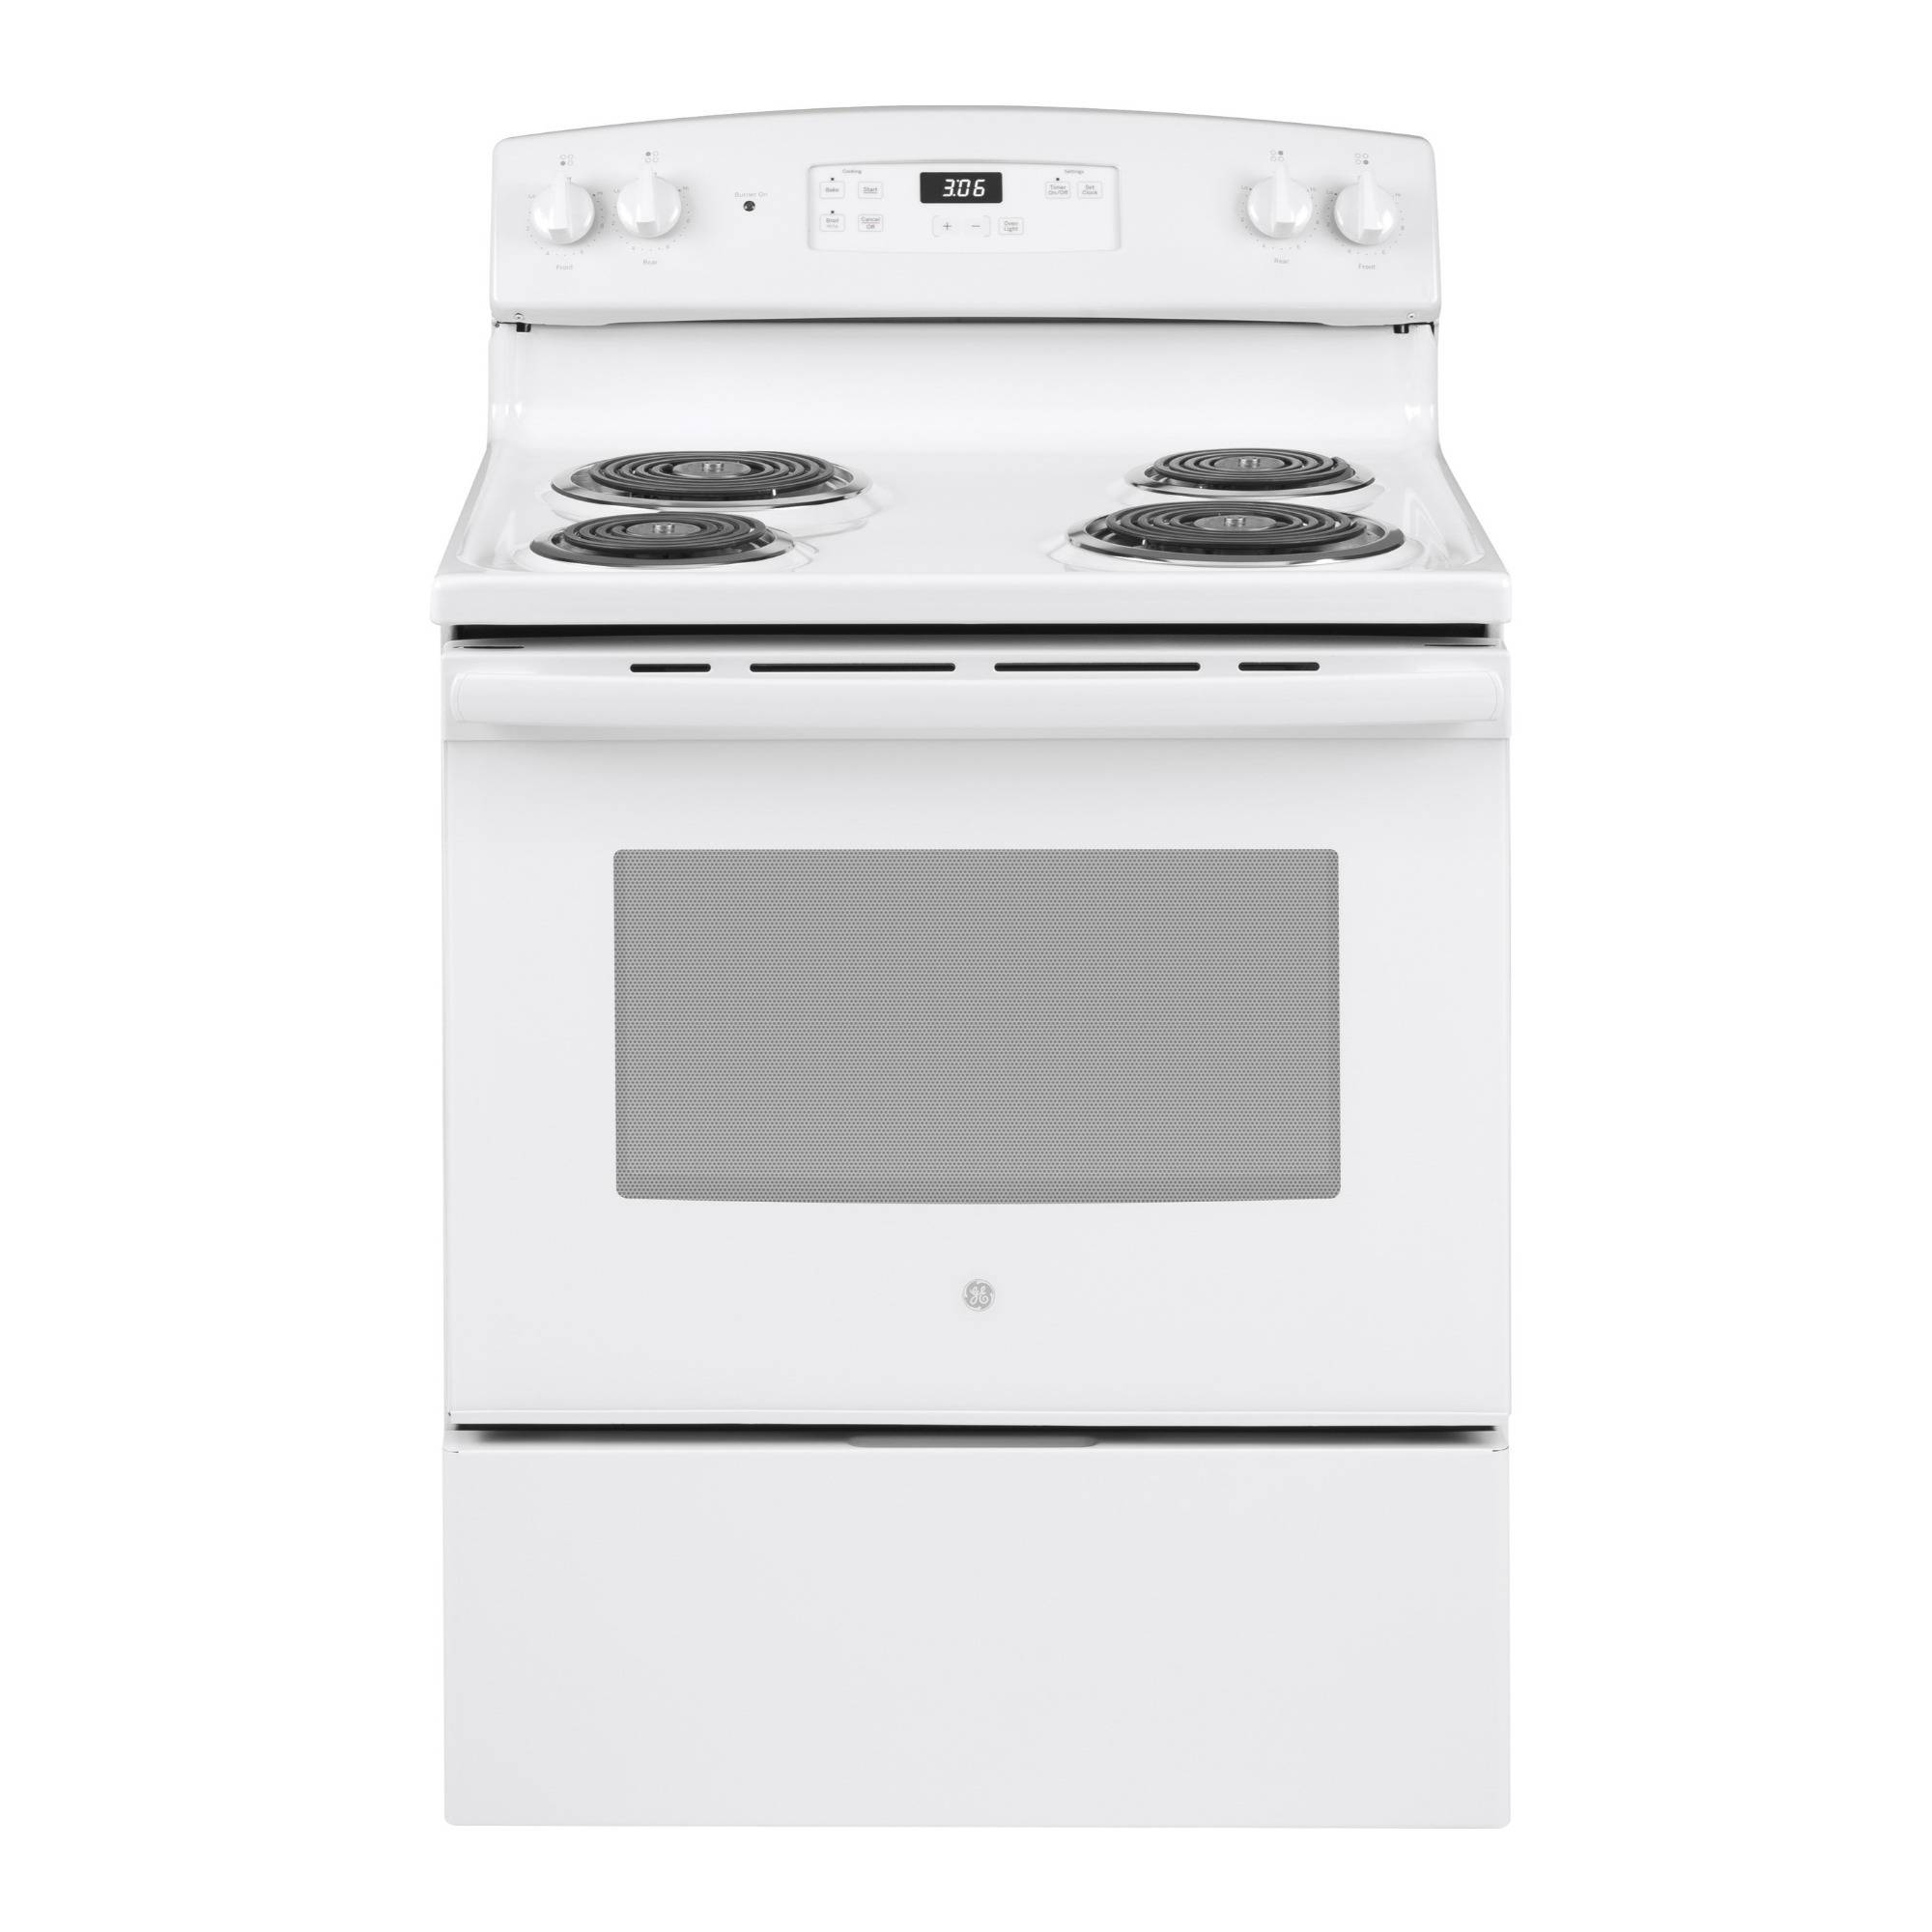 GE JBS360DMWW 30-Inch Free-Standing Electric Range (White)